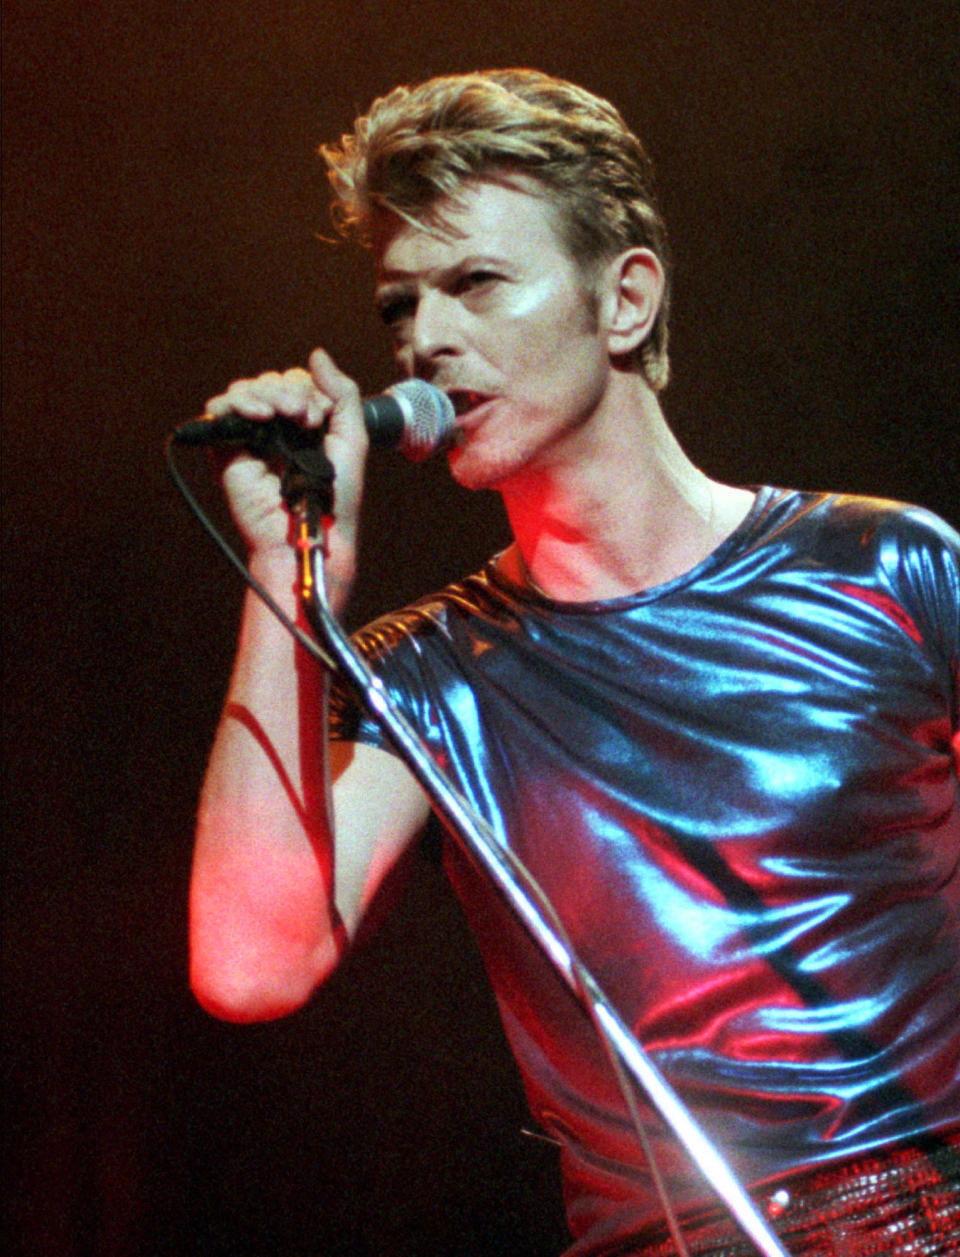 FILE - David Bowie performs during a concert in Hartford, Conn., on Sept. 14, 1995. The many faces and inspirations of David Bowie are getting a permanent home in London. Britain’s Victoria & Albert Museum announced Thursday, Feb. 23, 2023 it has acquired Bowie’s archive of more than 80,000 items as a gift from the late musician’s estate.(AP Photo/Bob Child, File)